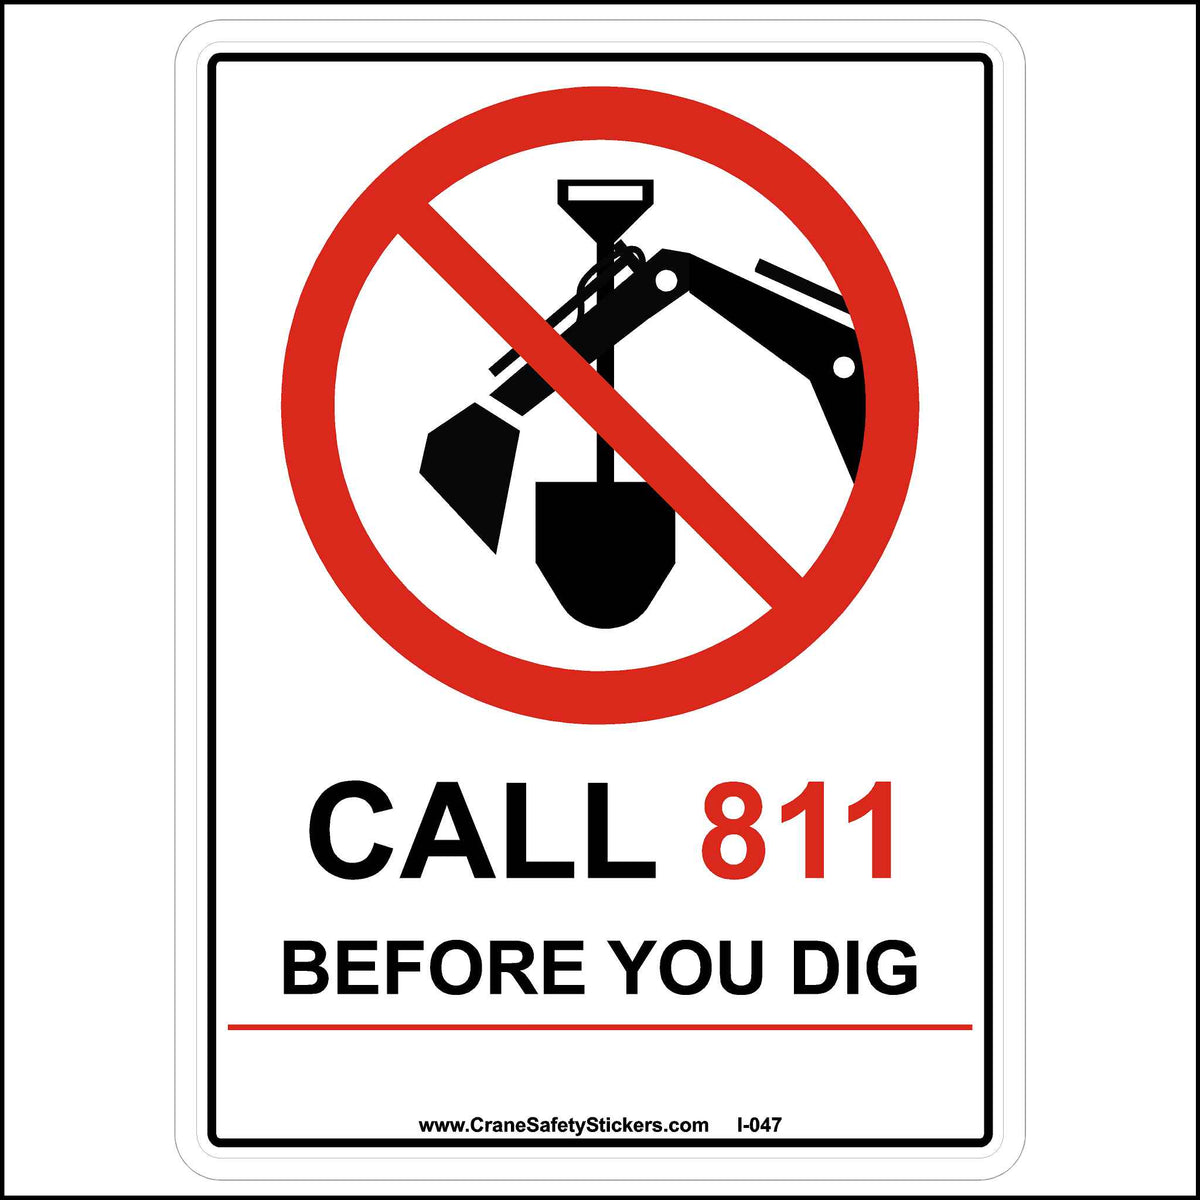 Call Before You Dig Sticker Printed With. Call 811 Before You Dig Sticker.